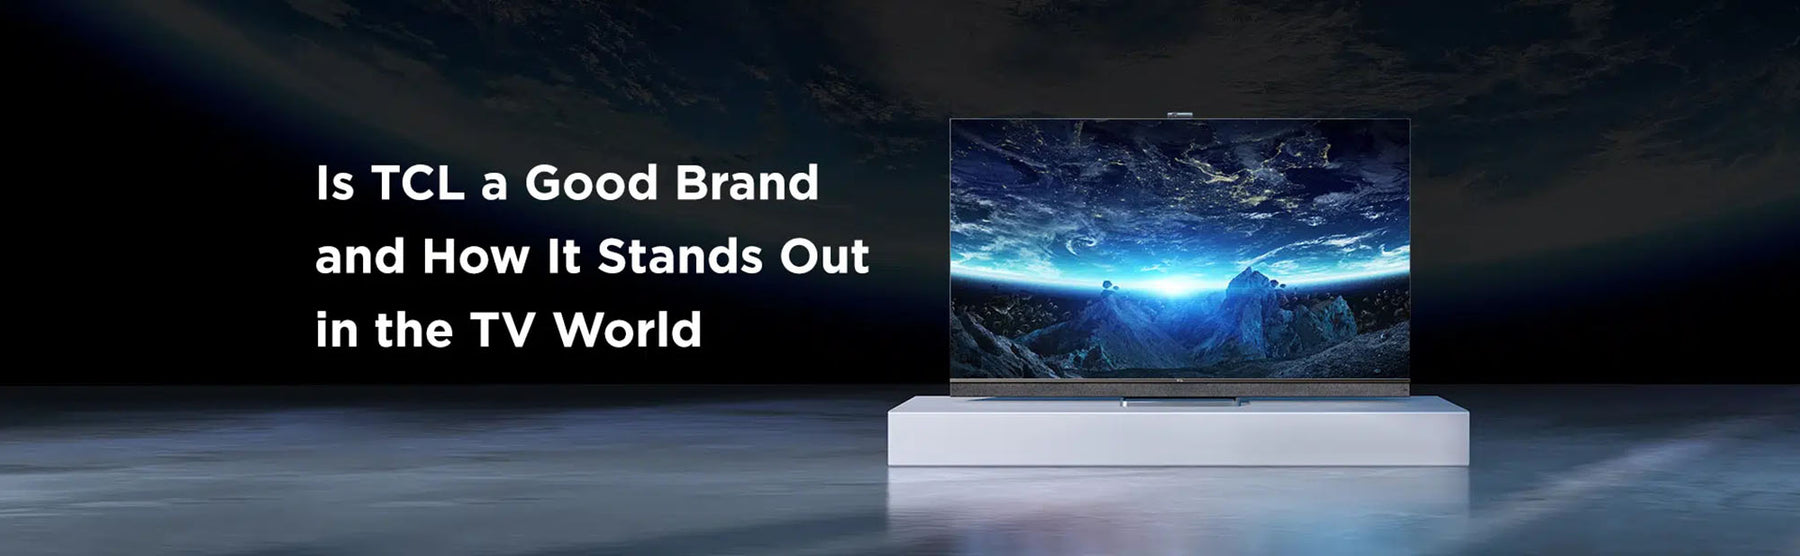 Is TCL a good TV brand and how it stands out in the TV world